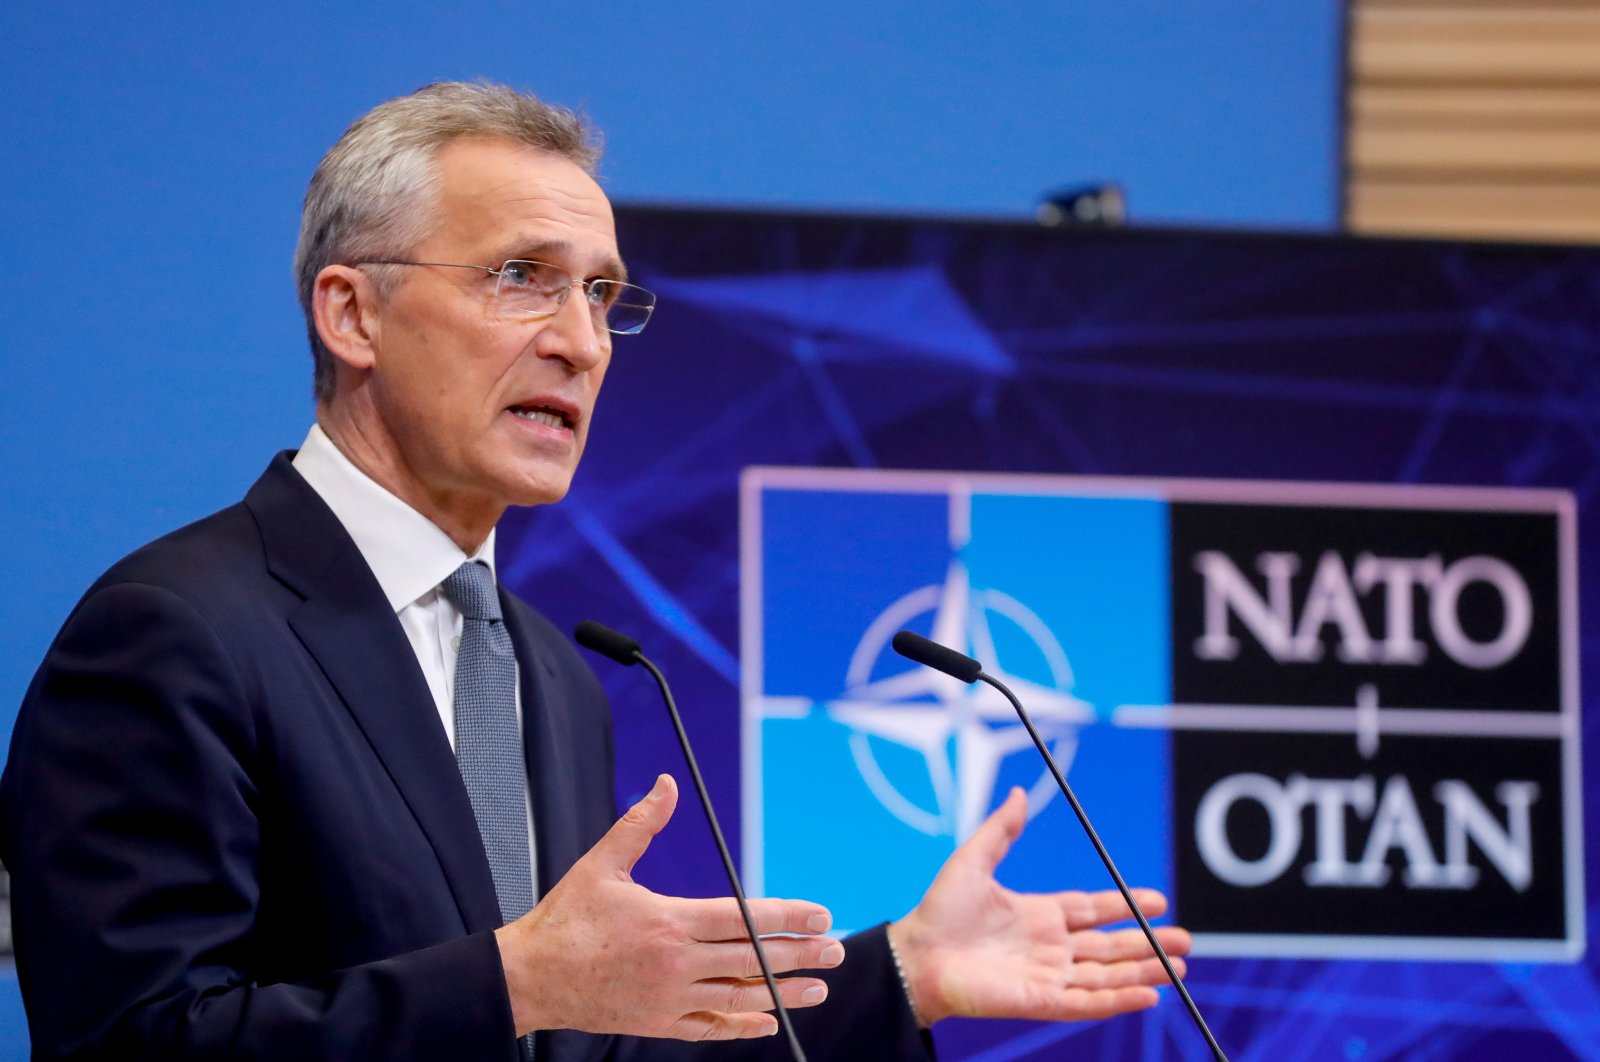 NATO Secretary-General Jens Stoltenberg speaks during a pre-ministerial press conference at the Alliance headquarters in Brussels, Belgium, Feb. 15, 2022. (EPA-EFE Photo)